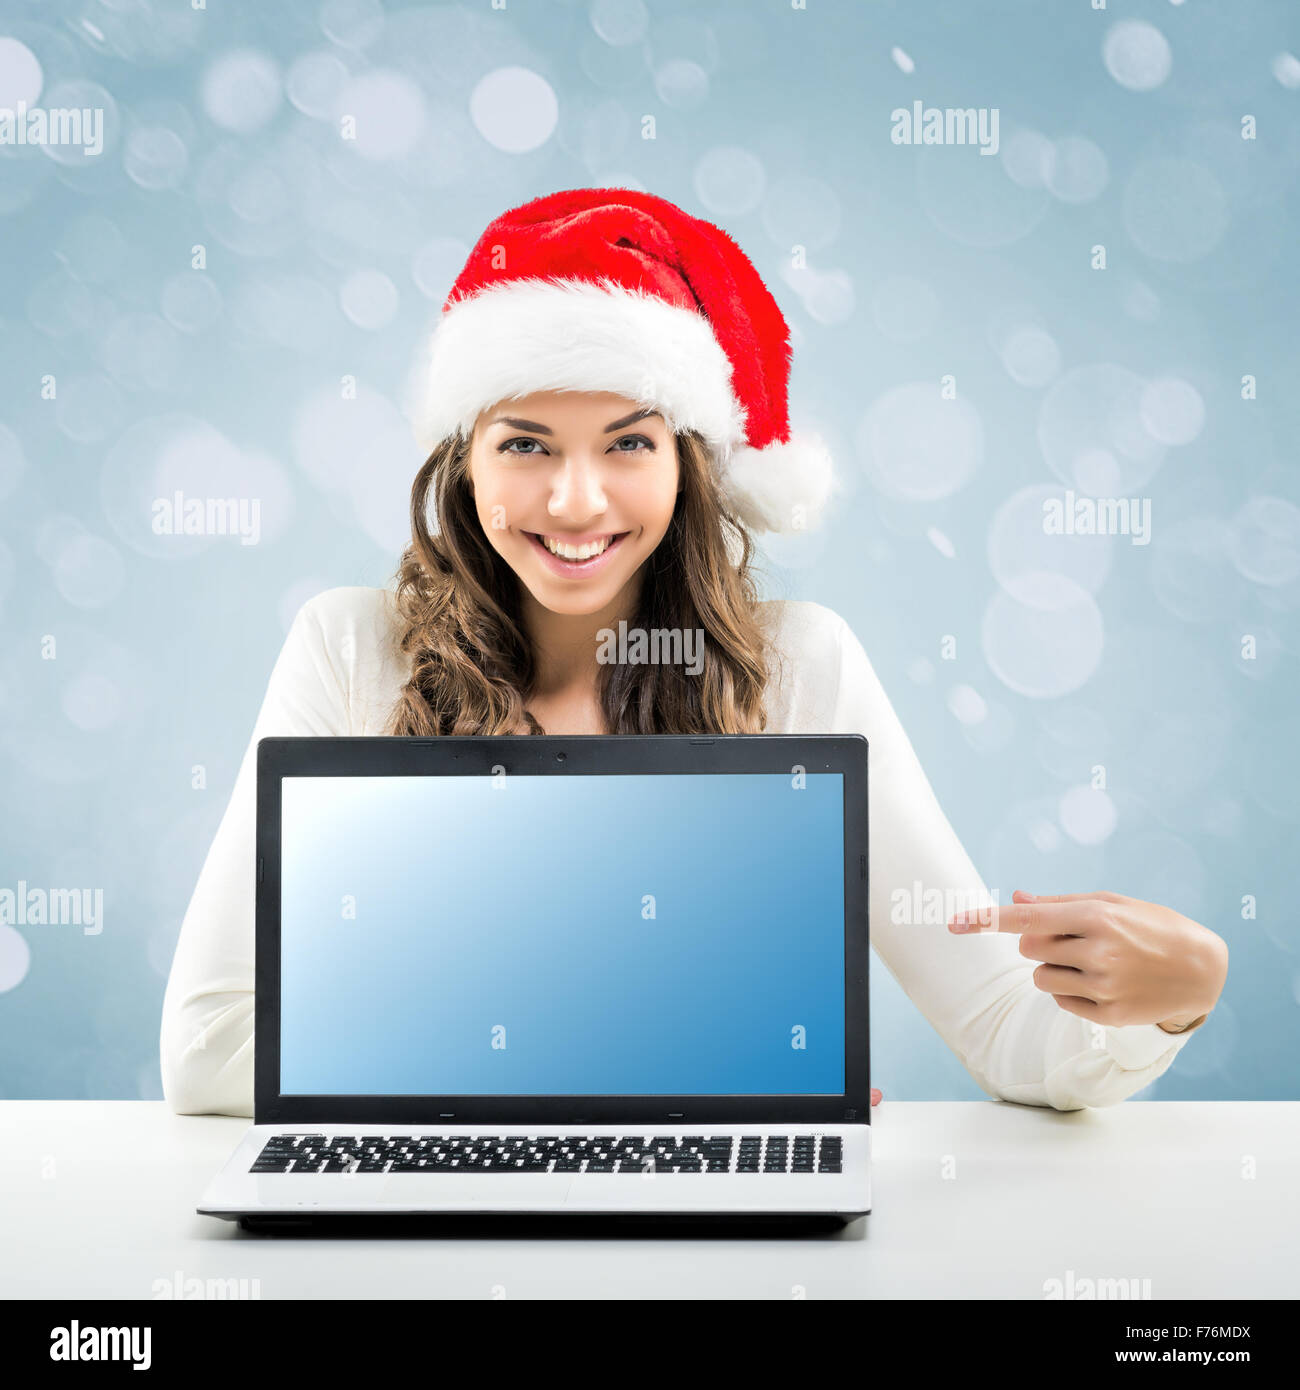 Business Woman working in Santa Claus hat Banque D'Images